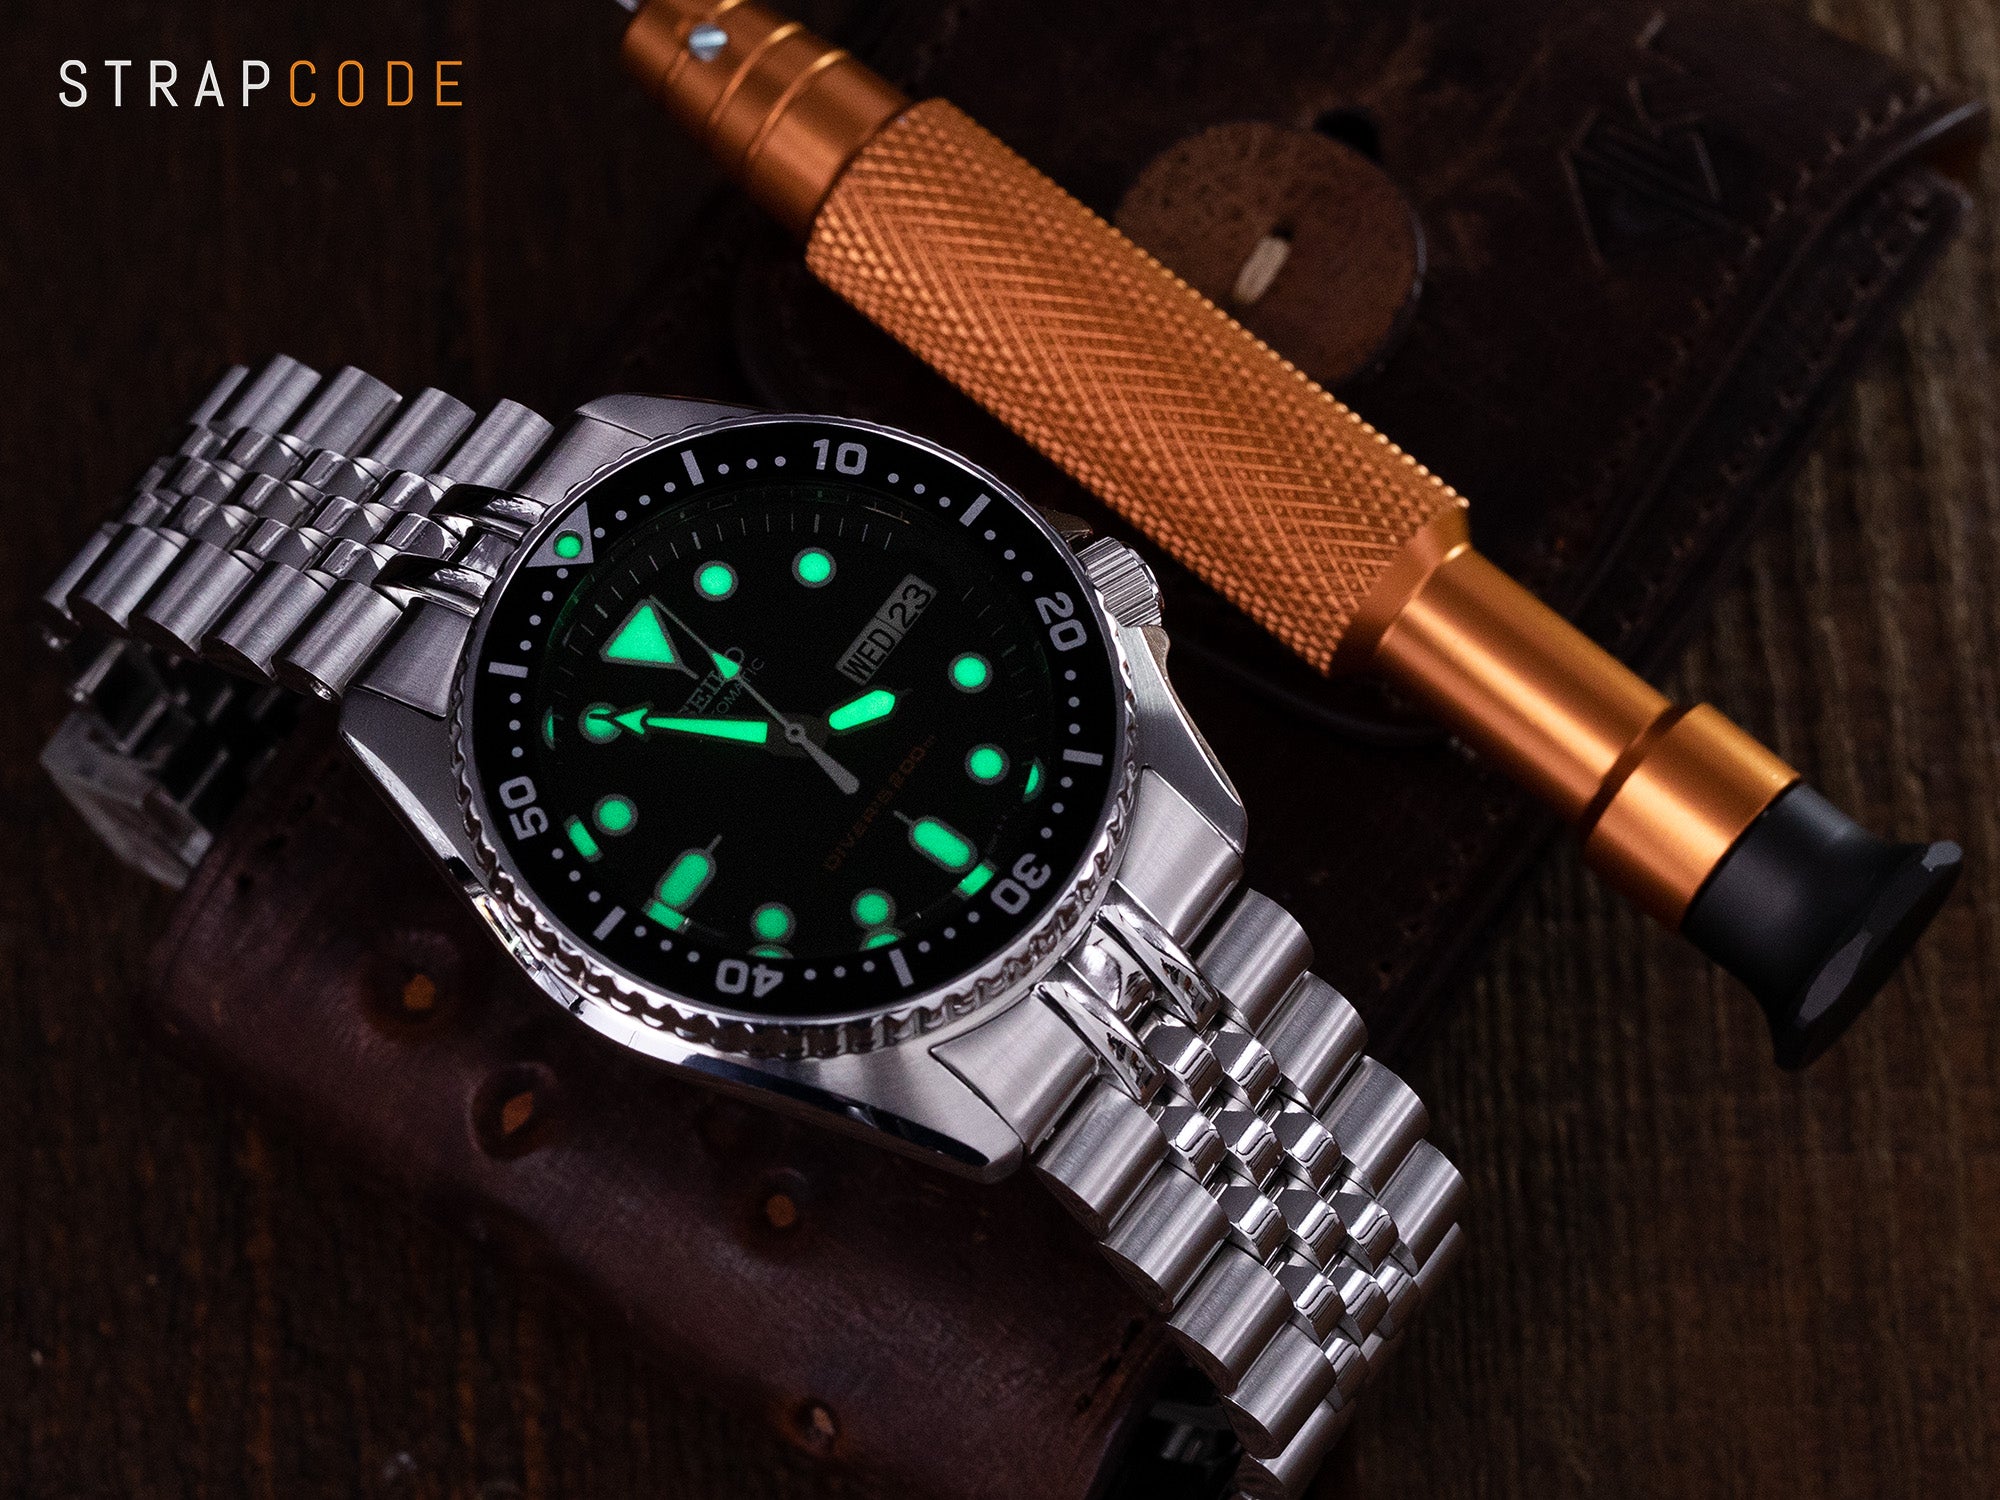 LumiBrite is a highly effective luminescent material used in Seiko SKX013 by Strapcode watch bands